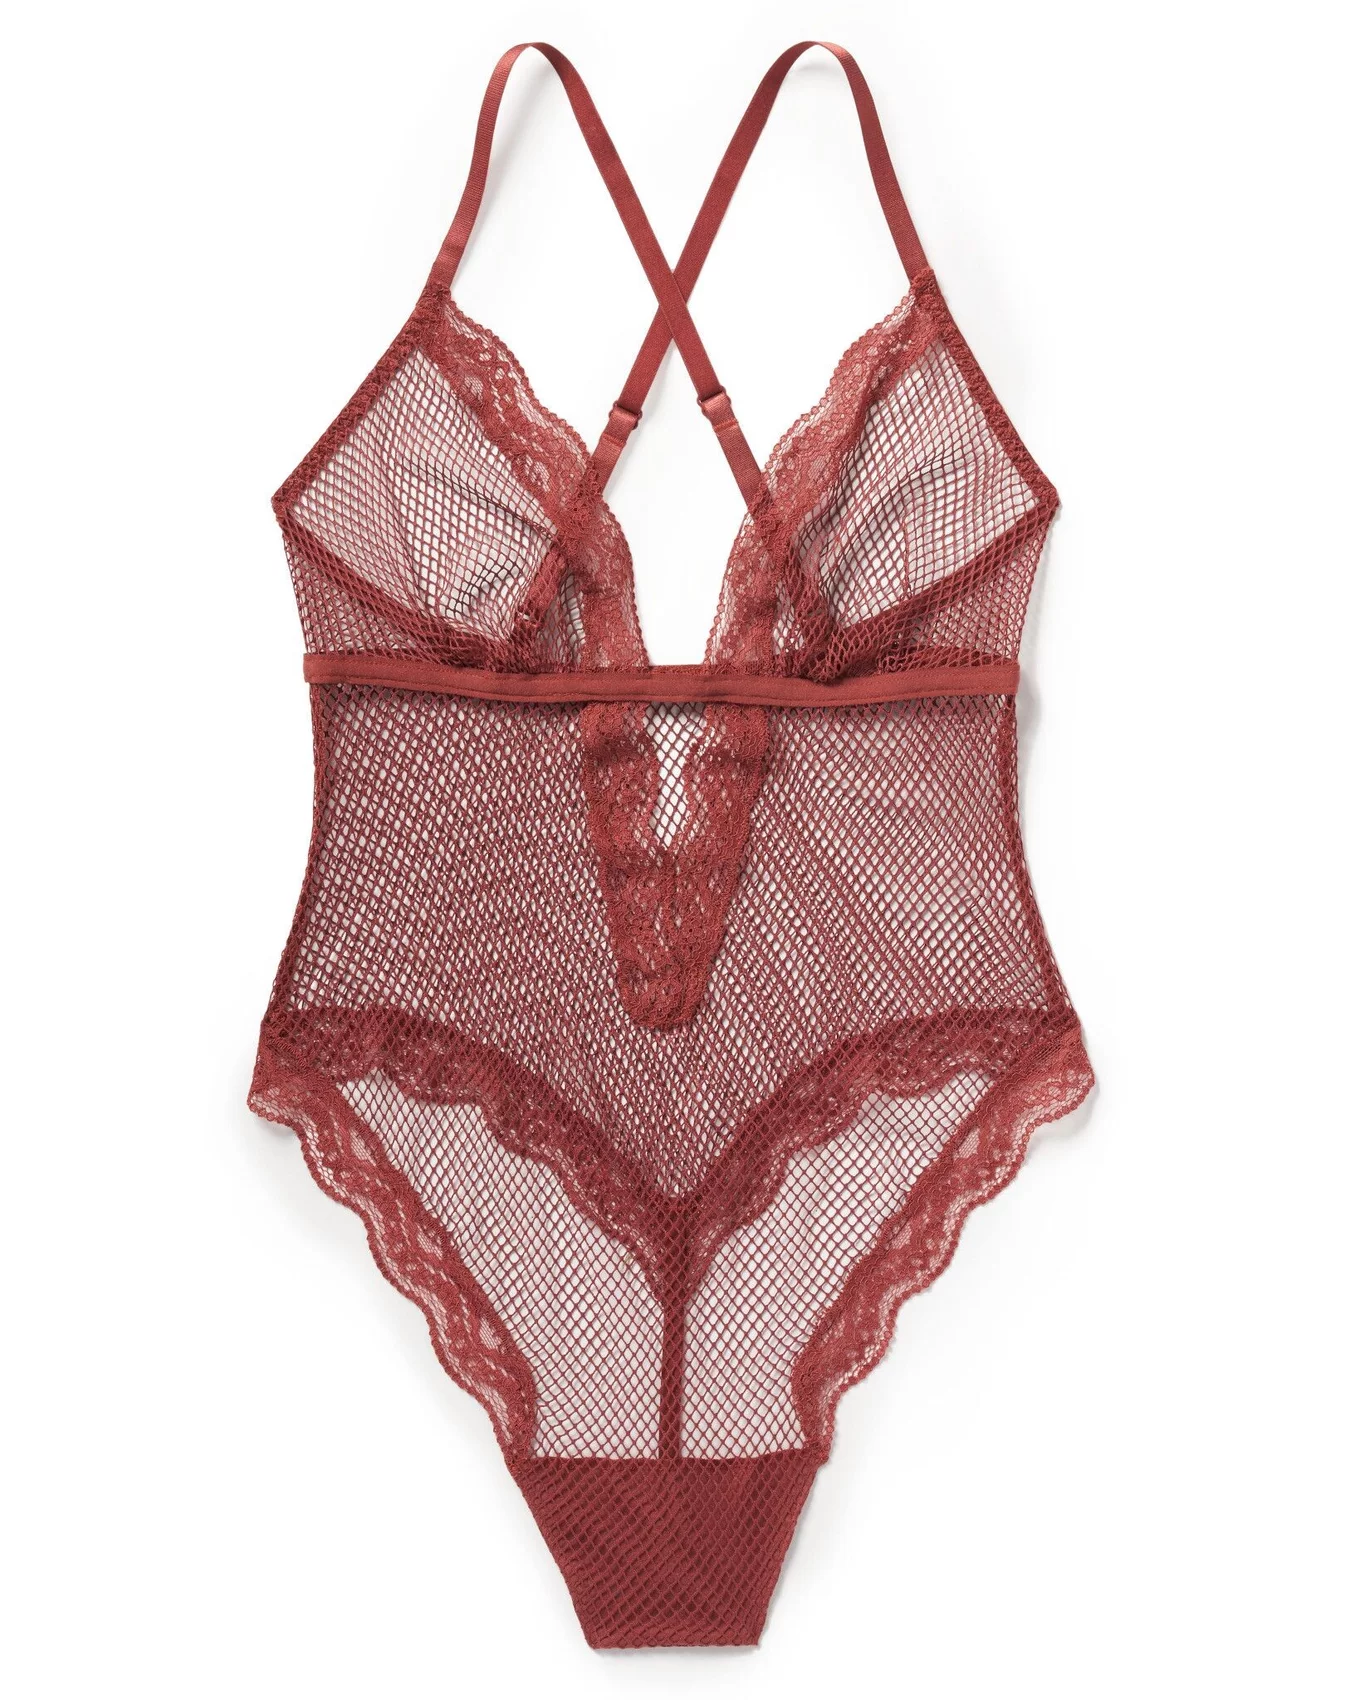 Adored by Adore Me Women's Mandy Wire-Free Unlined Lace/Mesh